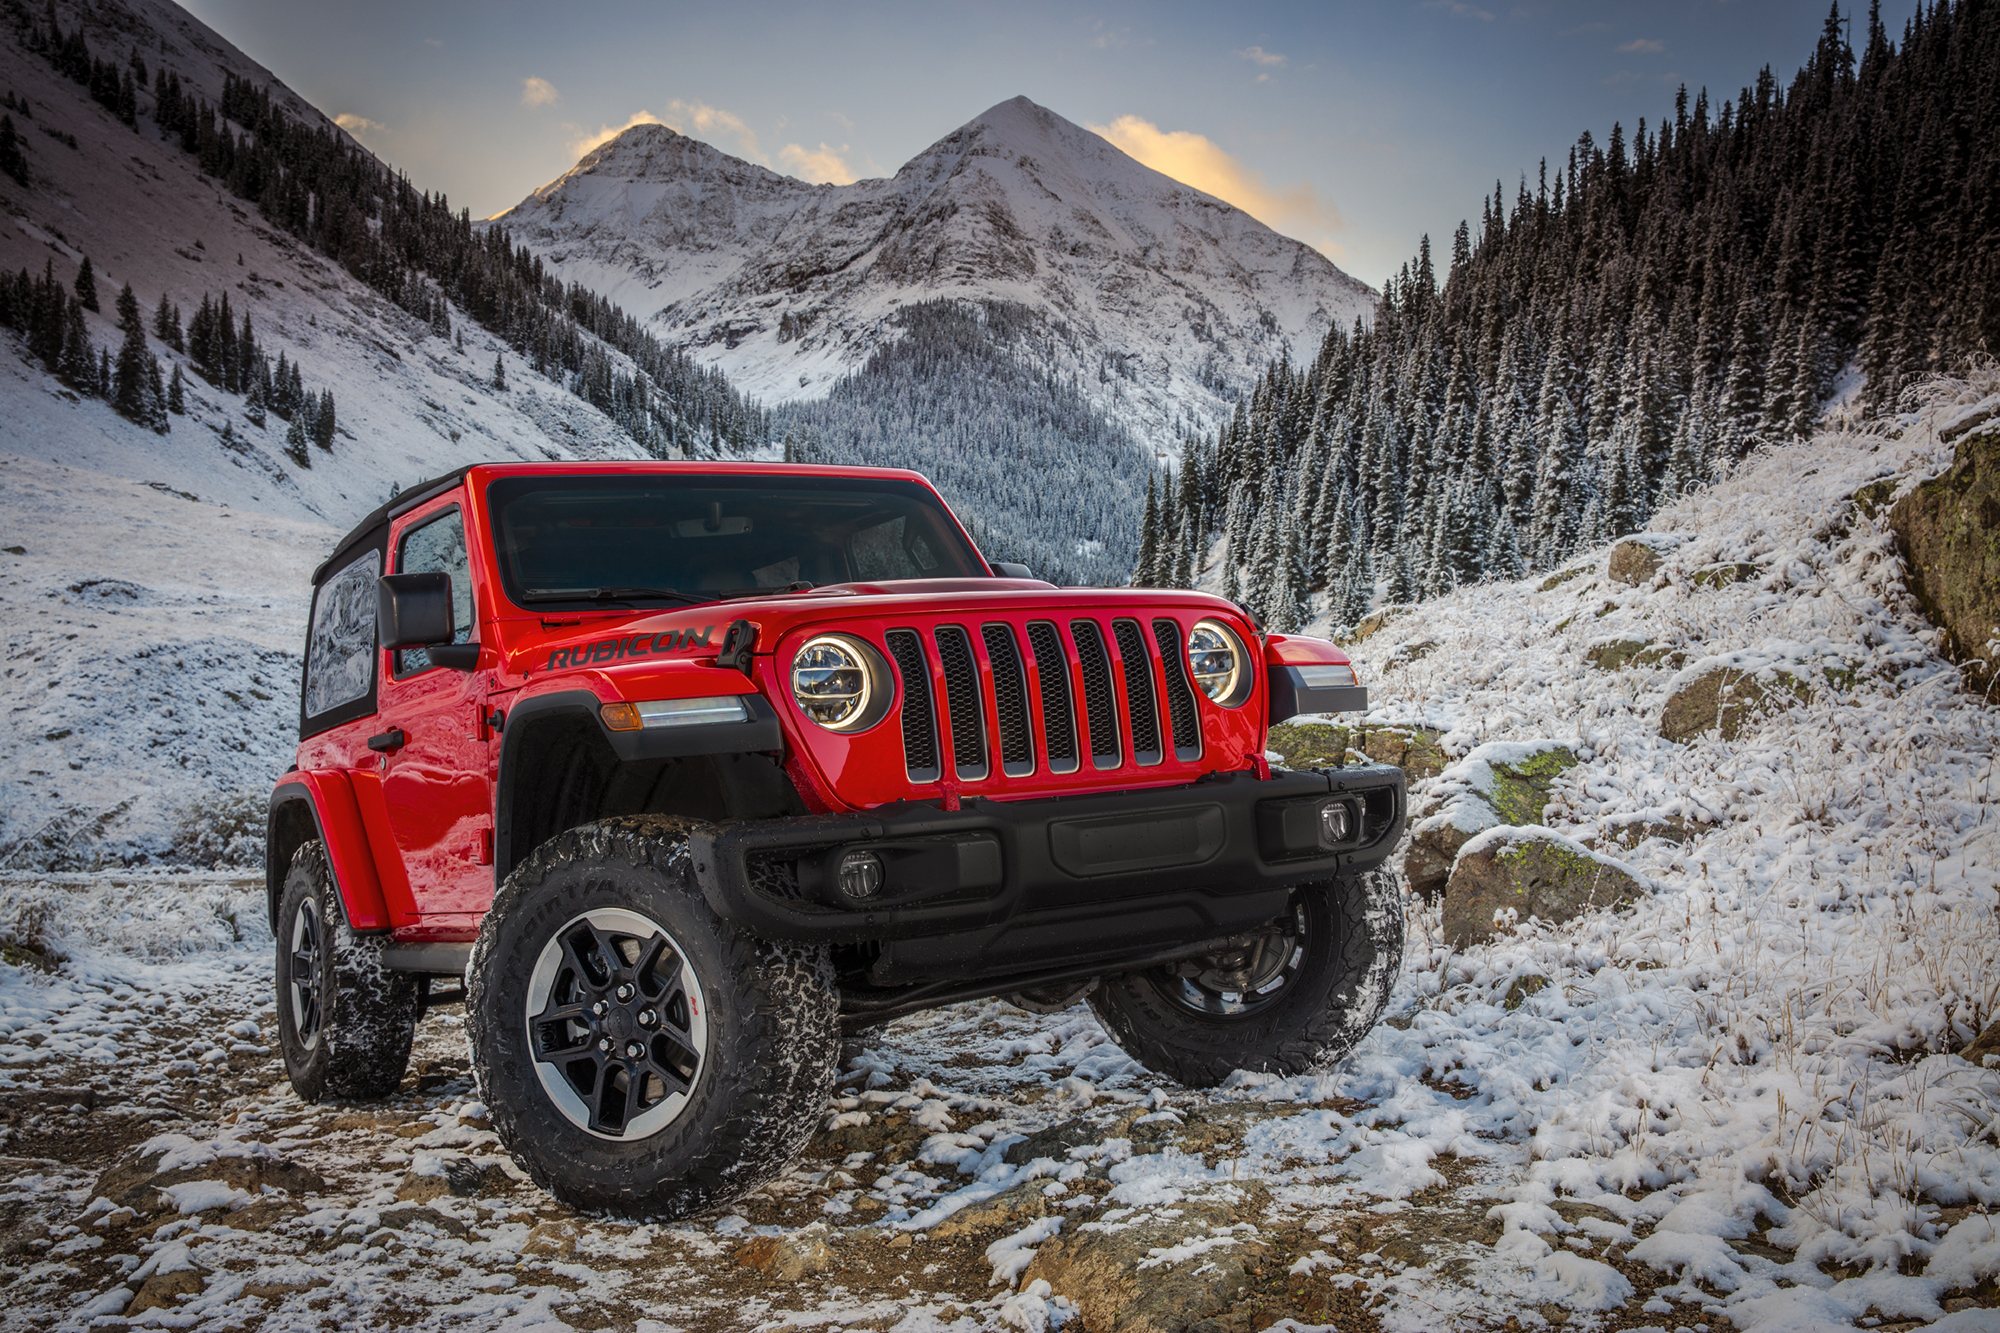 Jeep: The Perfect Companion for Nepal’s Rugged Terrain